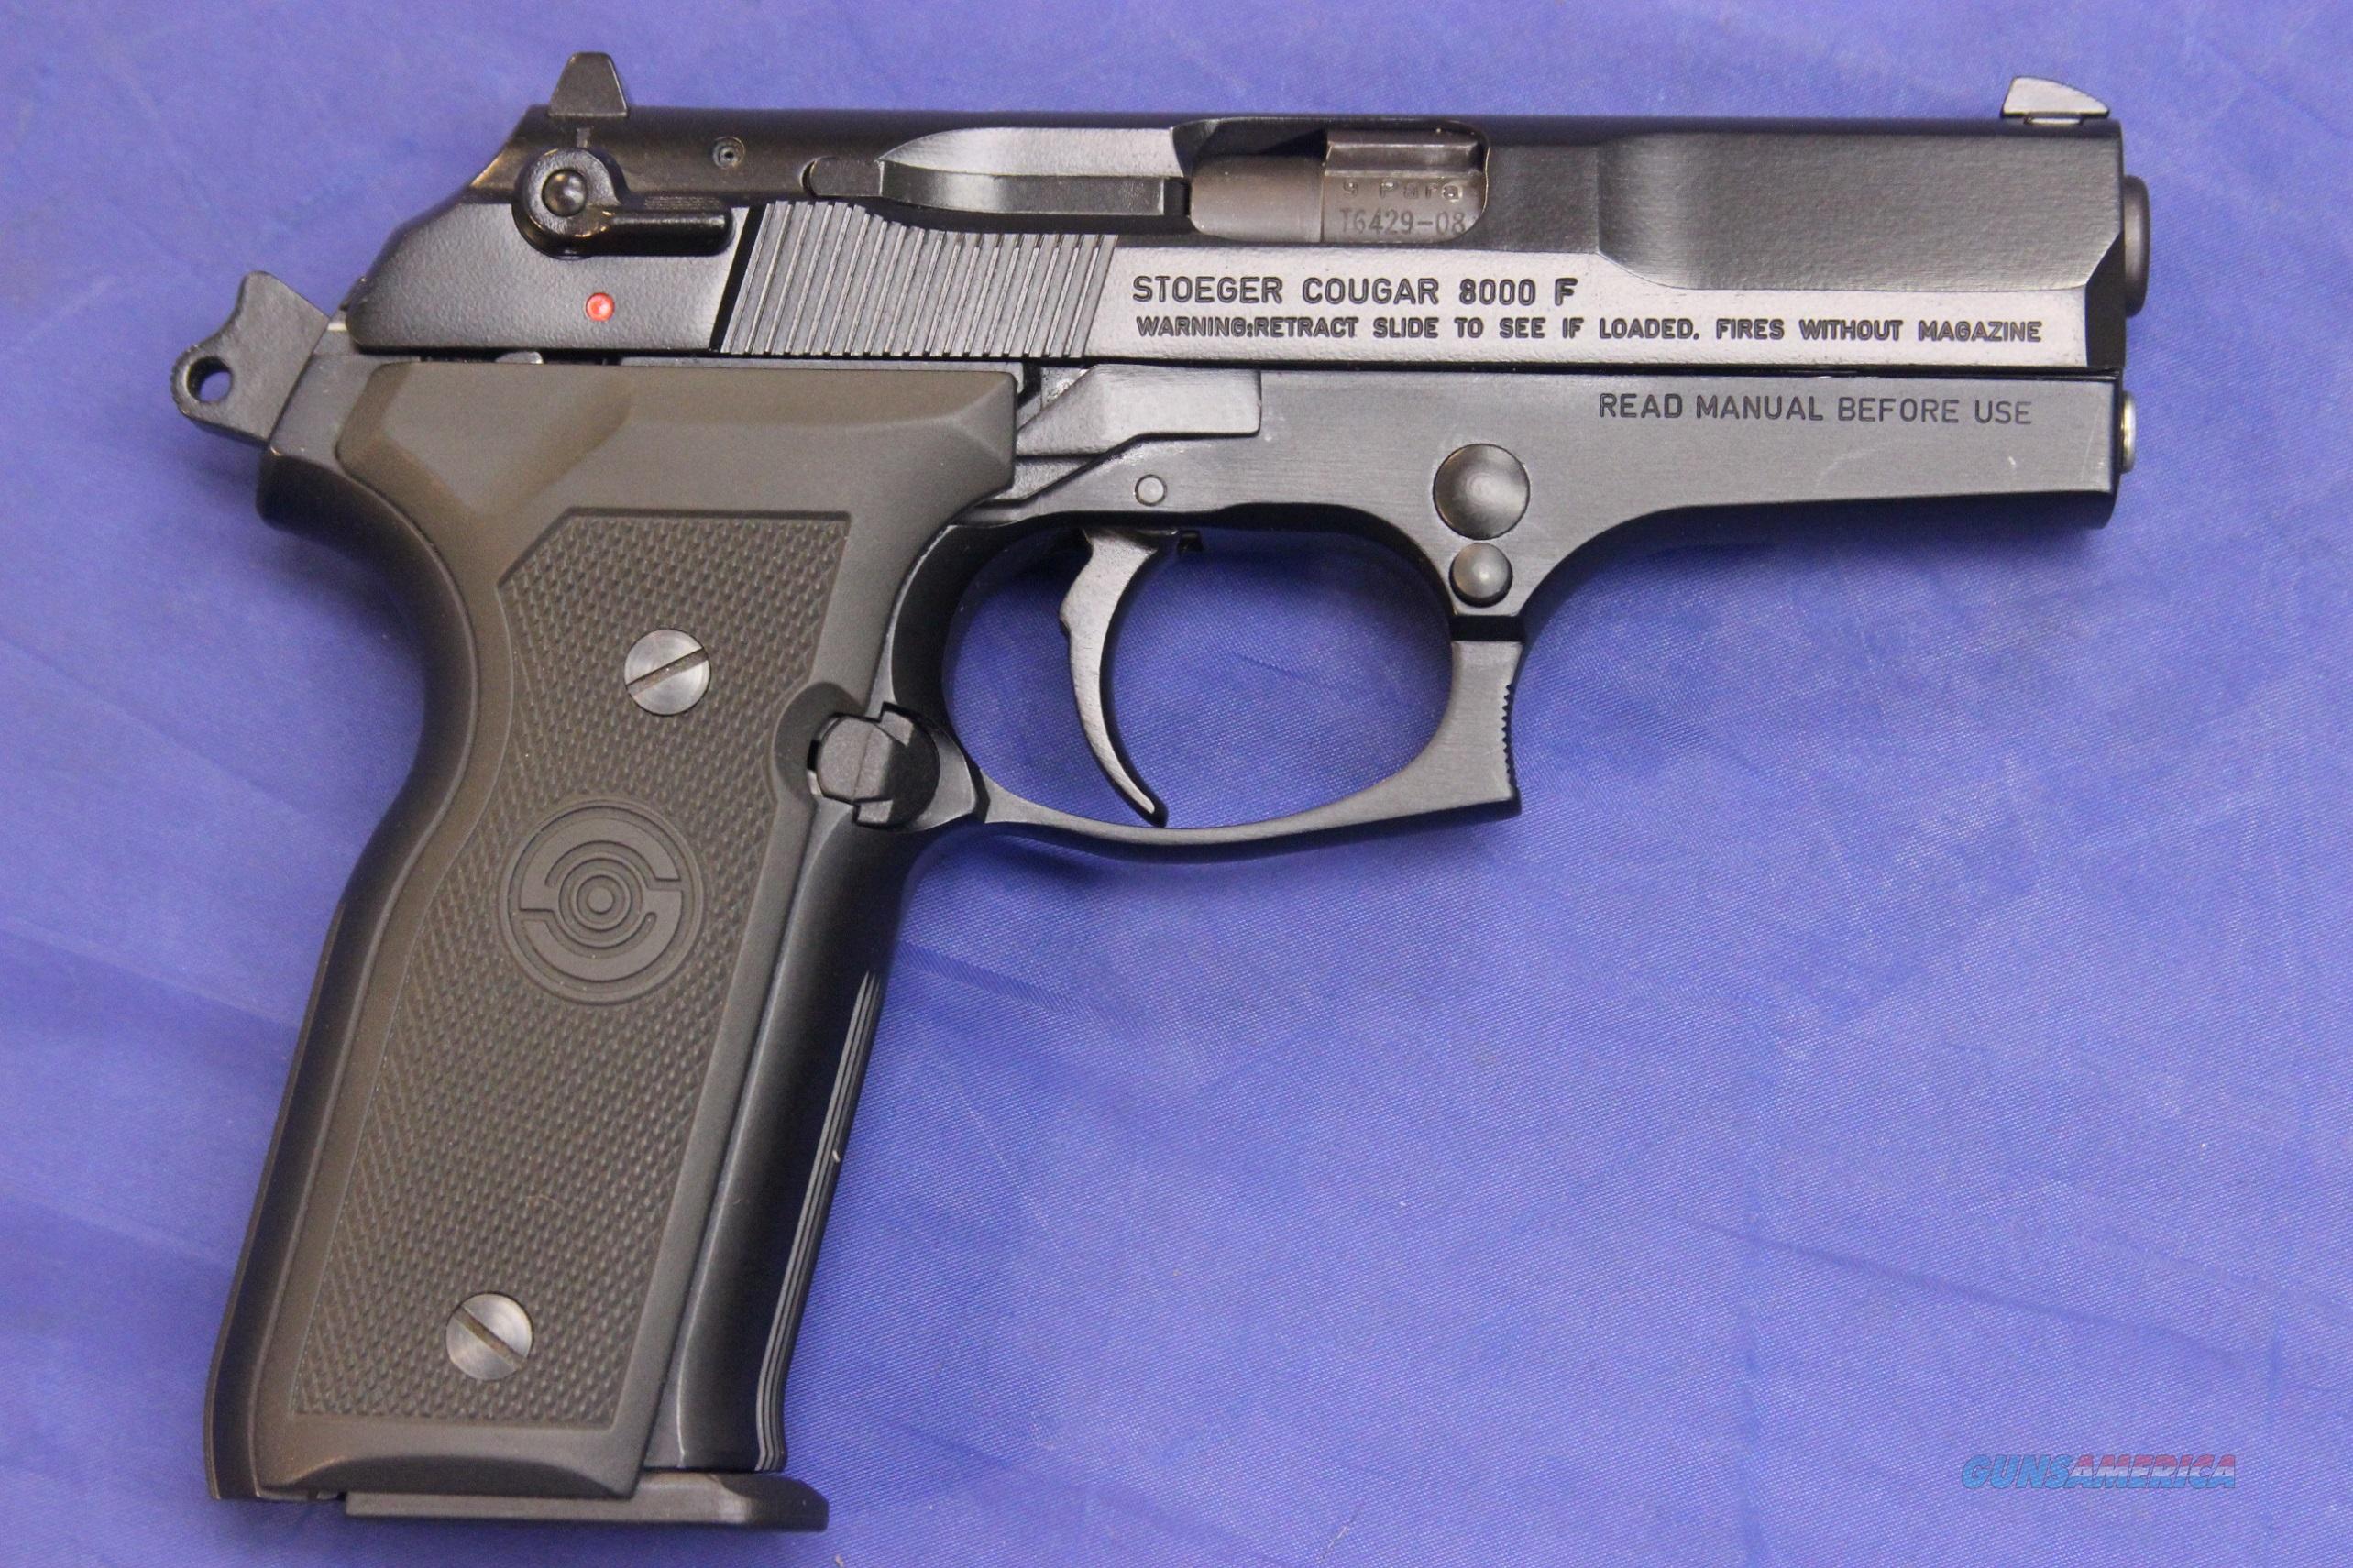 Stoeger 8000 F Cougar 9mm Pistol For Sale At 908287746